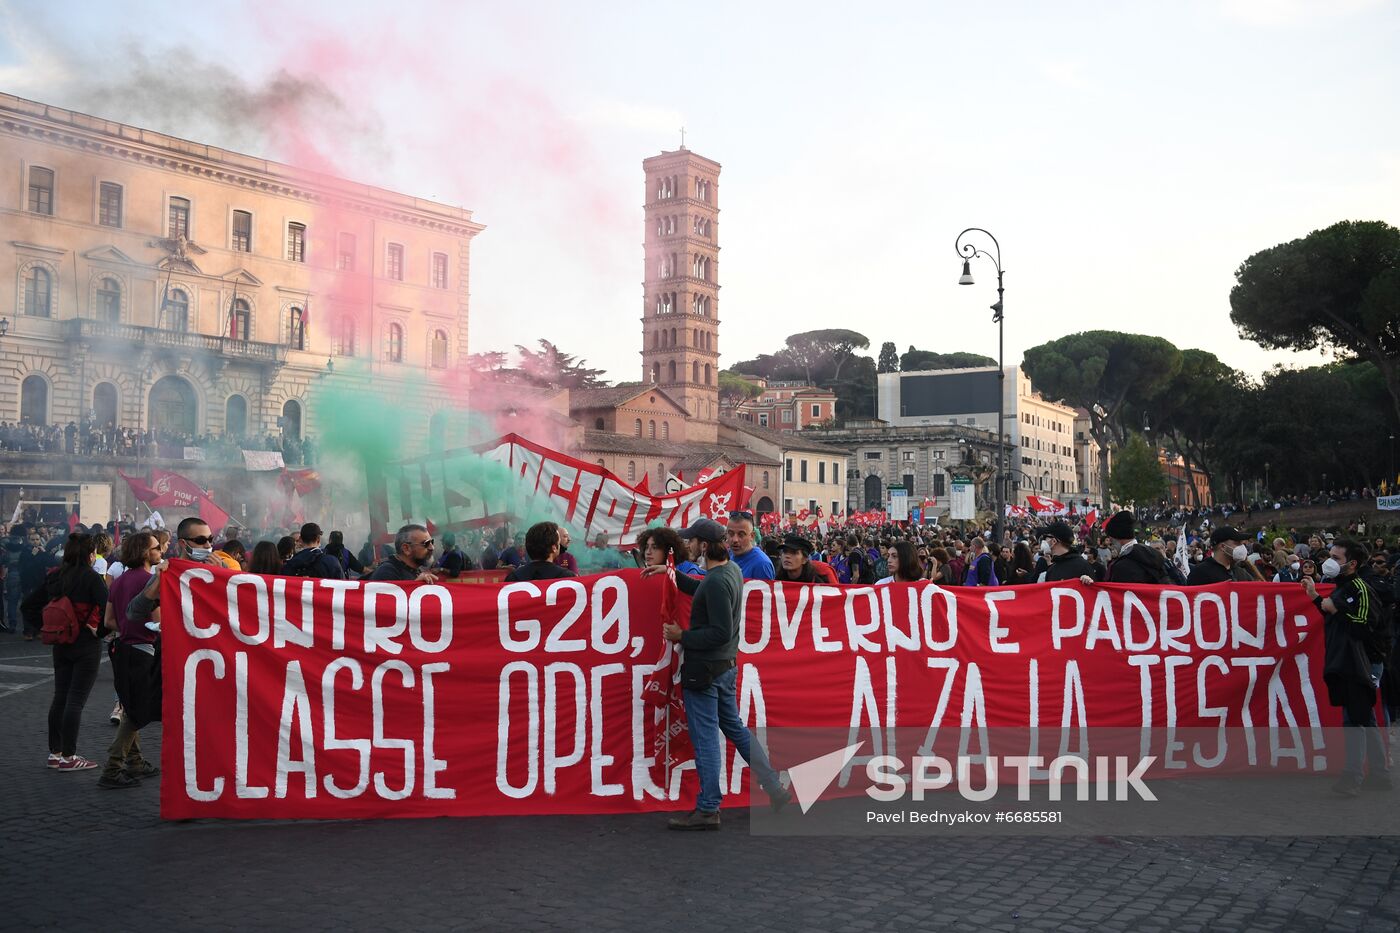 Italy G20 Summit Protest